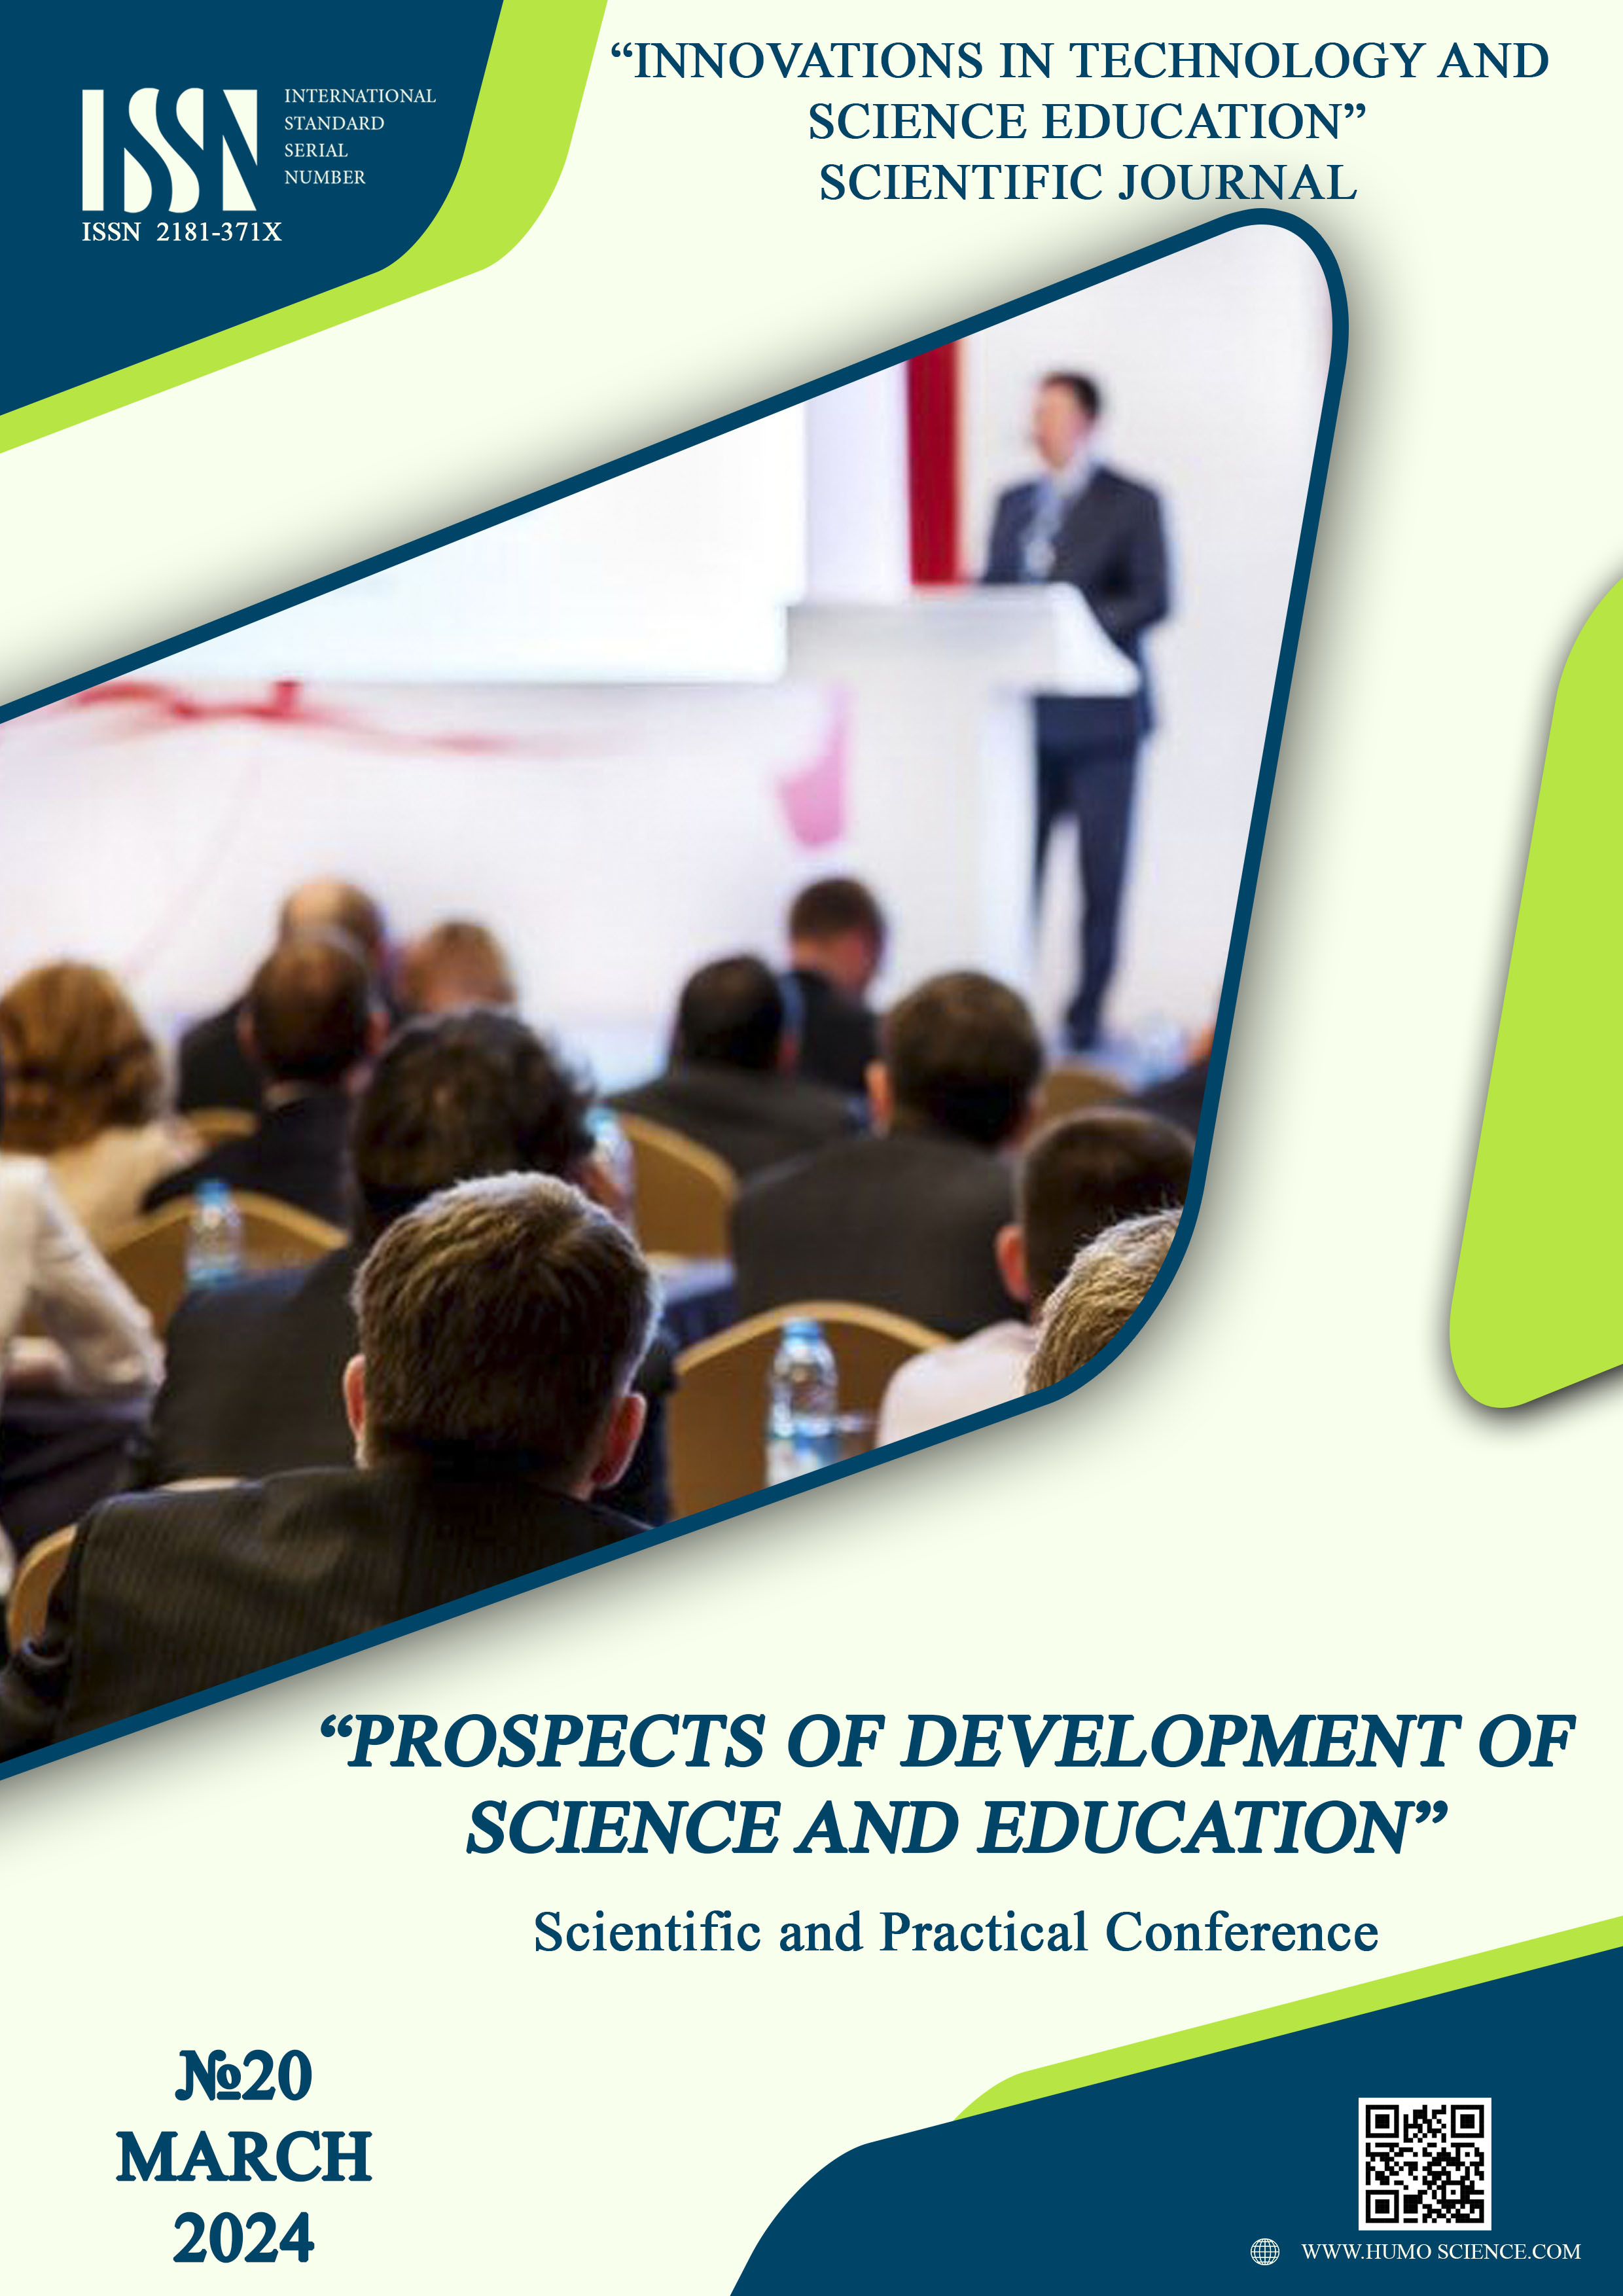 					View Vol. 1 No. 20 (2024): PROSPECTS OF DEVELOPMENT OF SCIENCE AND EDUCATION
				